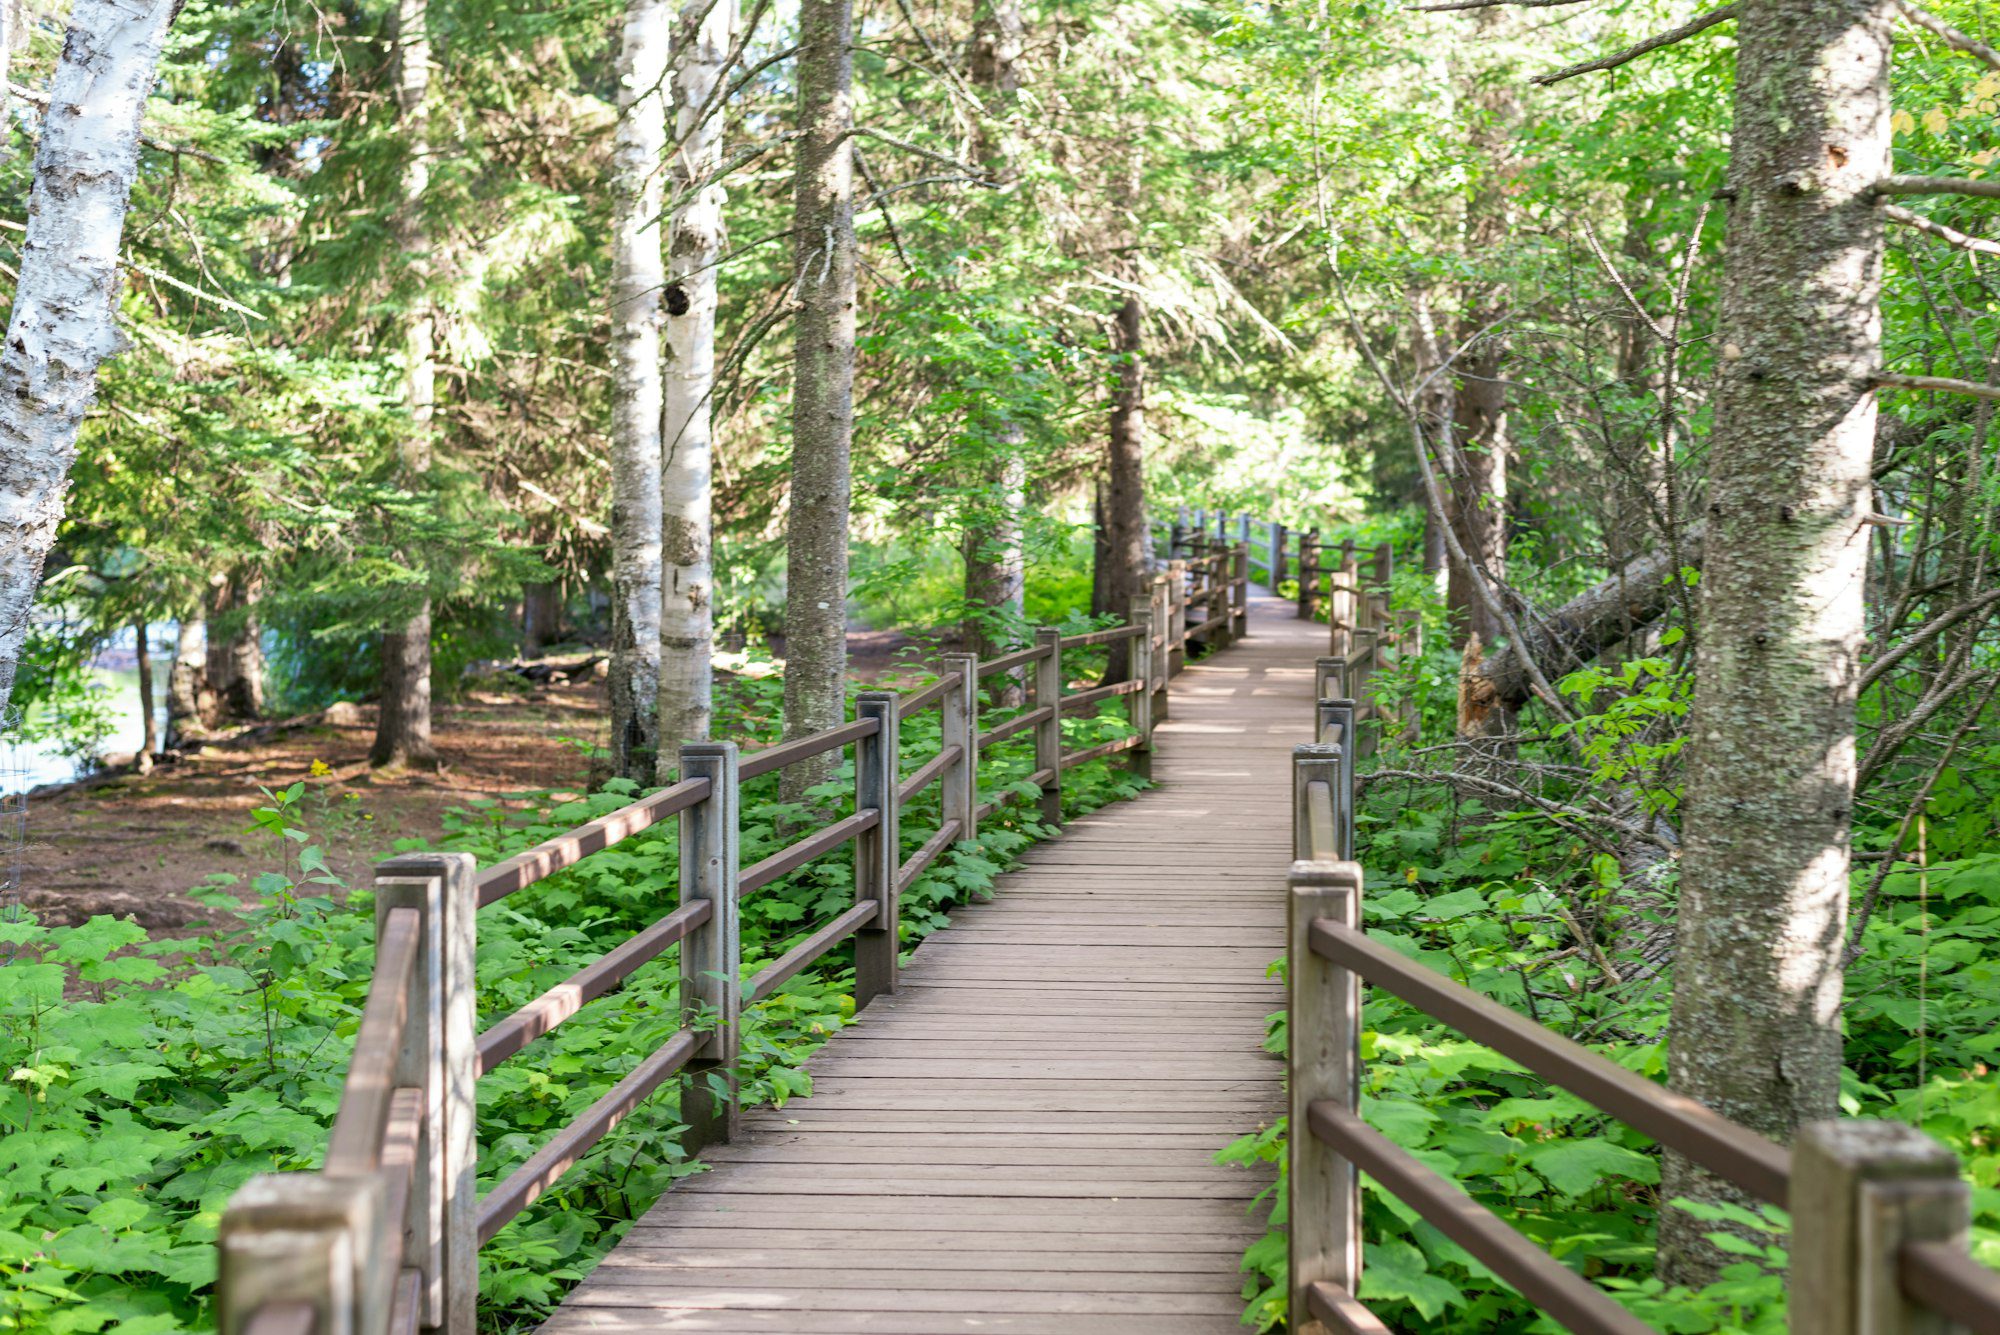 Wooden accessible walkway through forest at gooseberry falls state park in Minnesota